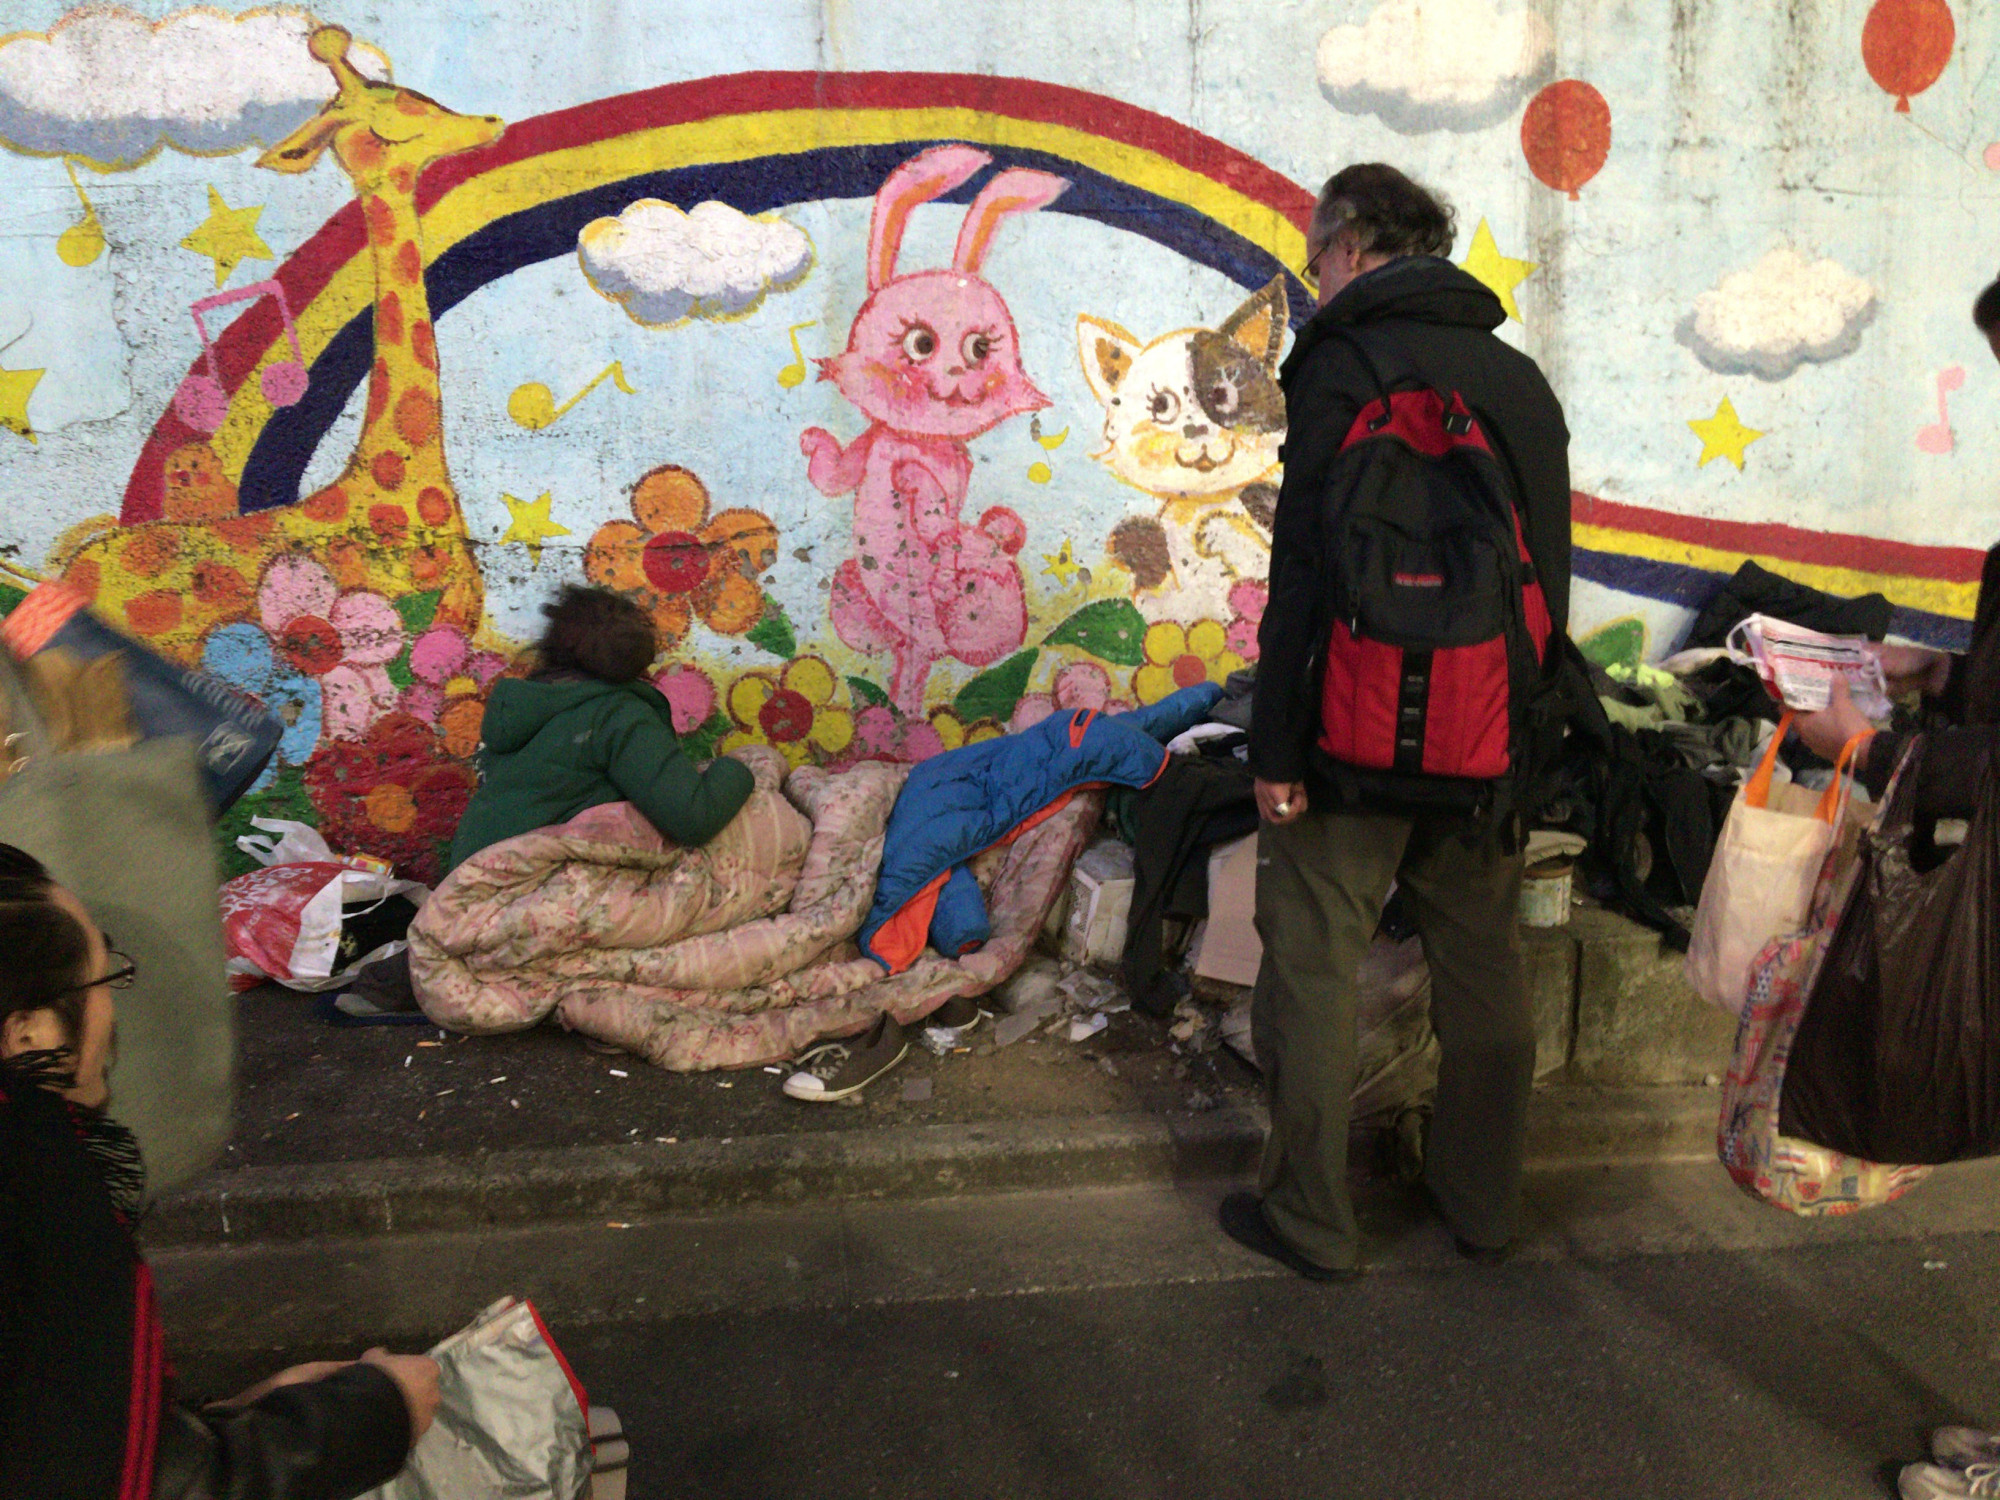 Study in contrasts: A homeless man sleeps next to a mural in Tokyo's Shinjuku district. | SIMON SCOTT